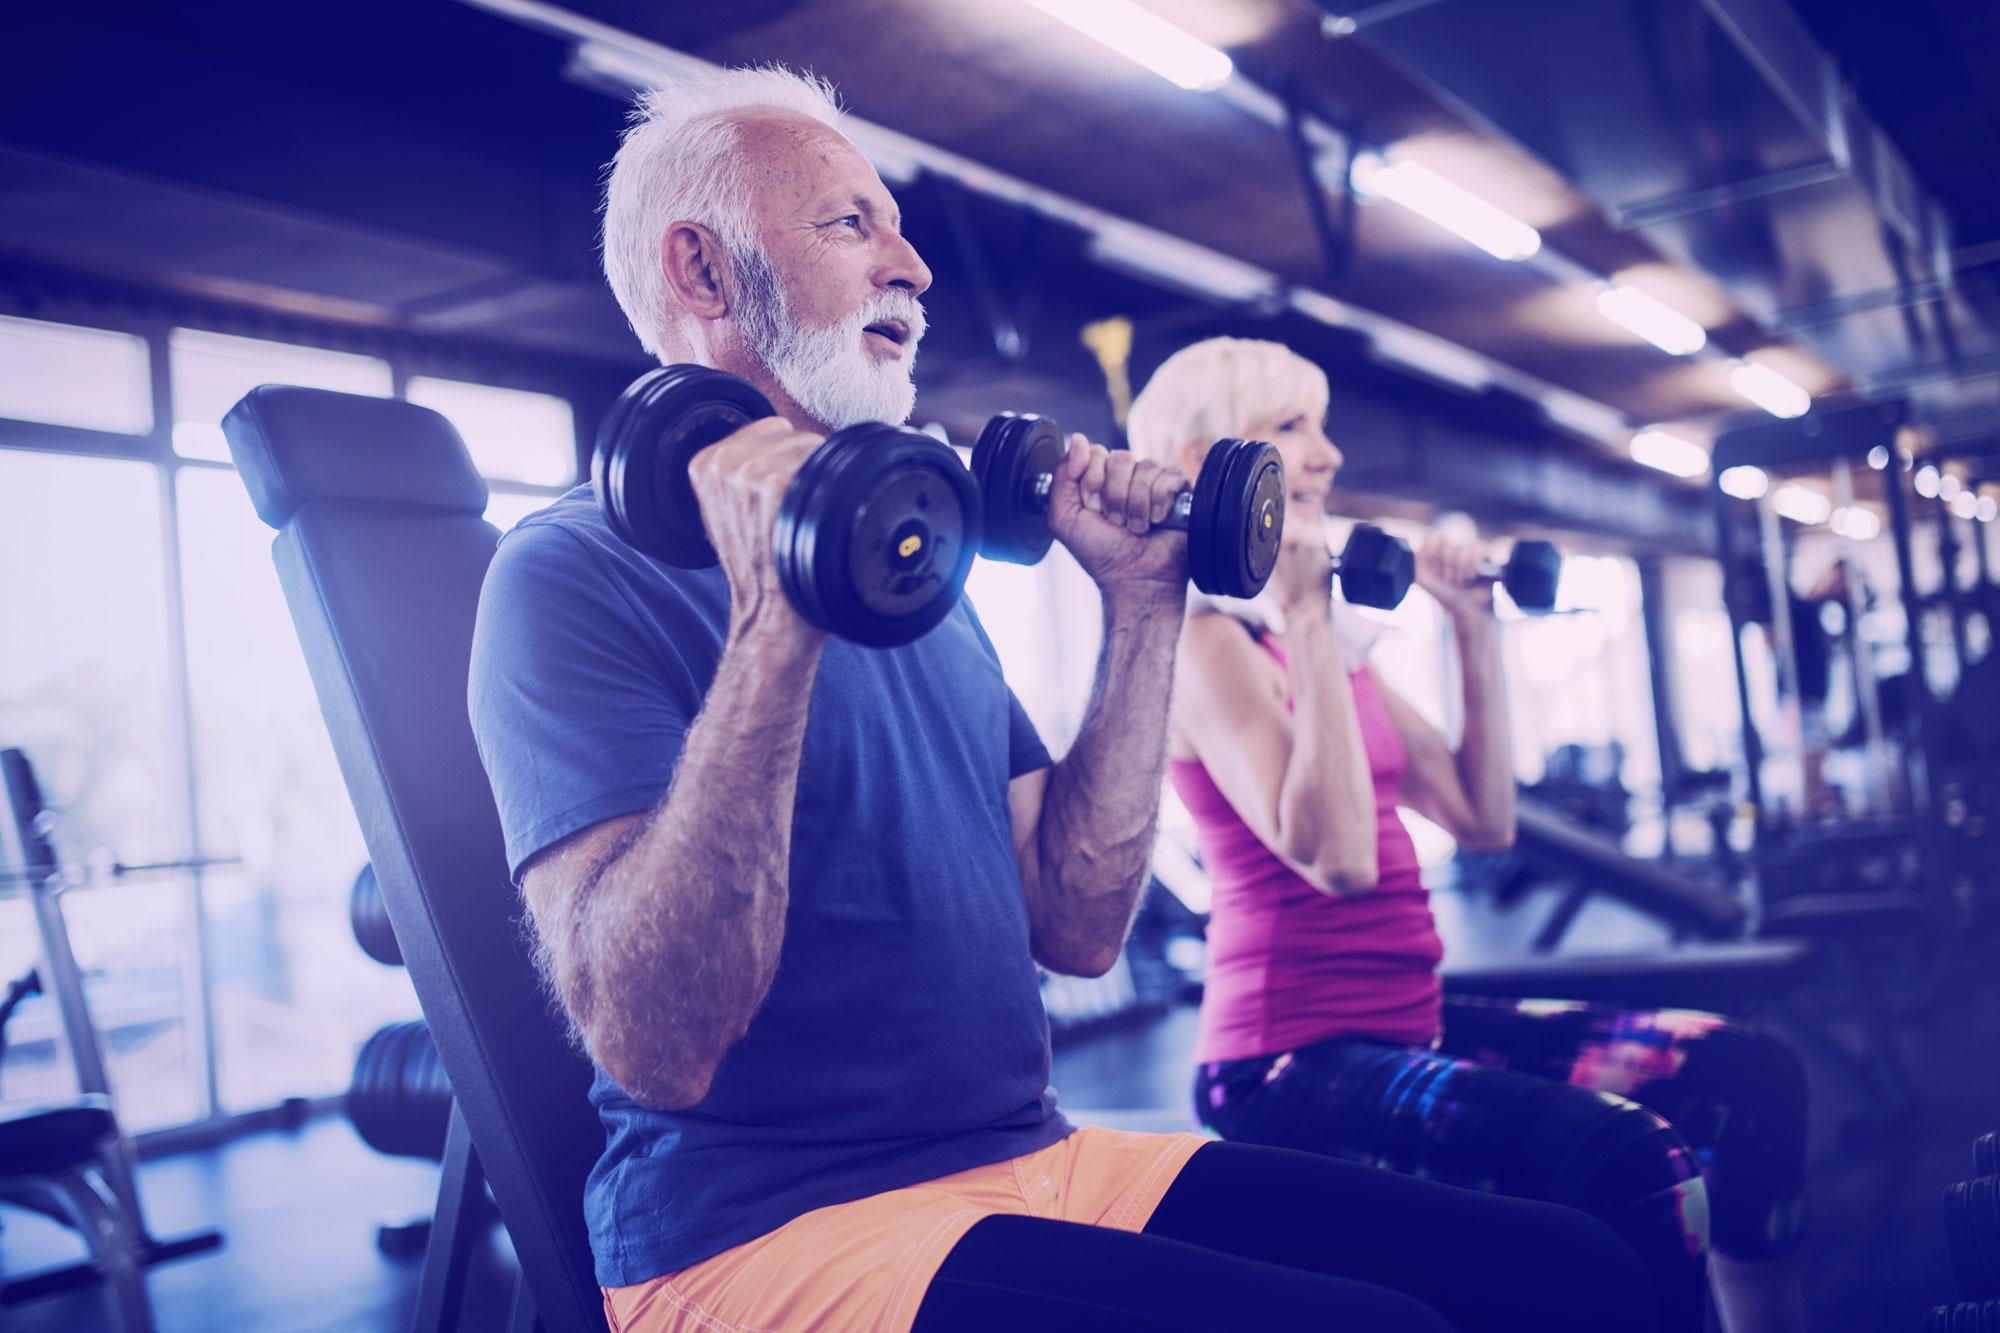 Senior people doing exercises in gym to stay fit